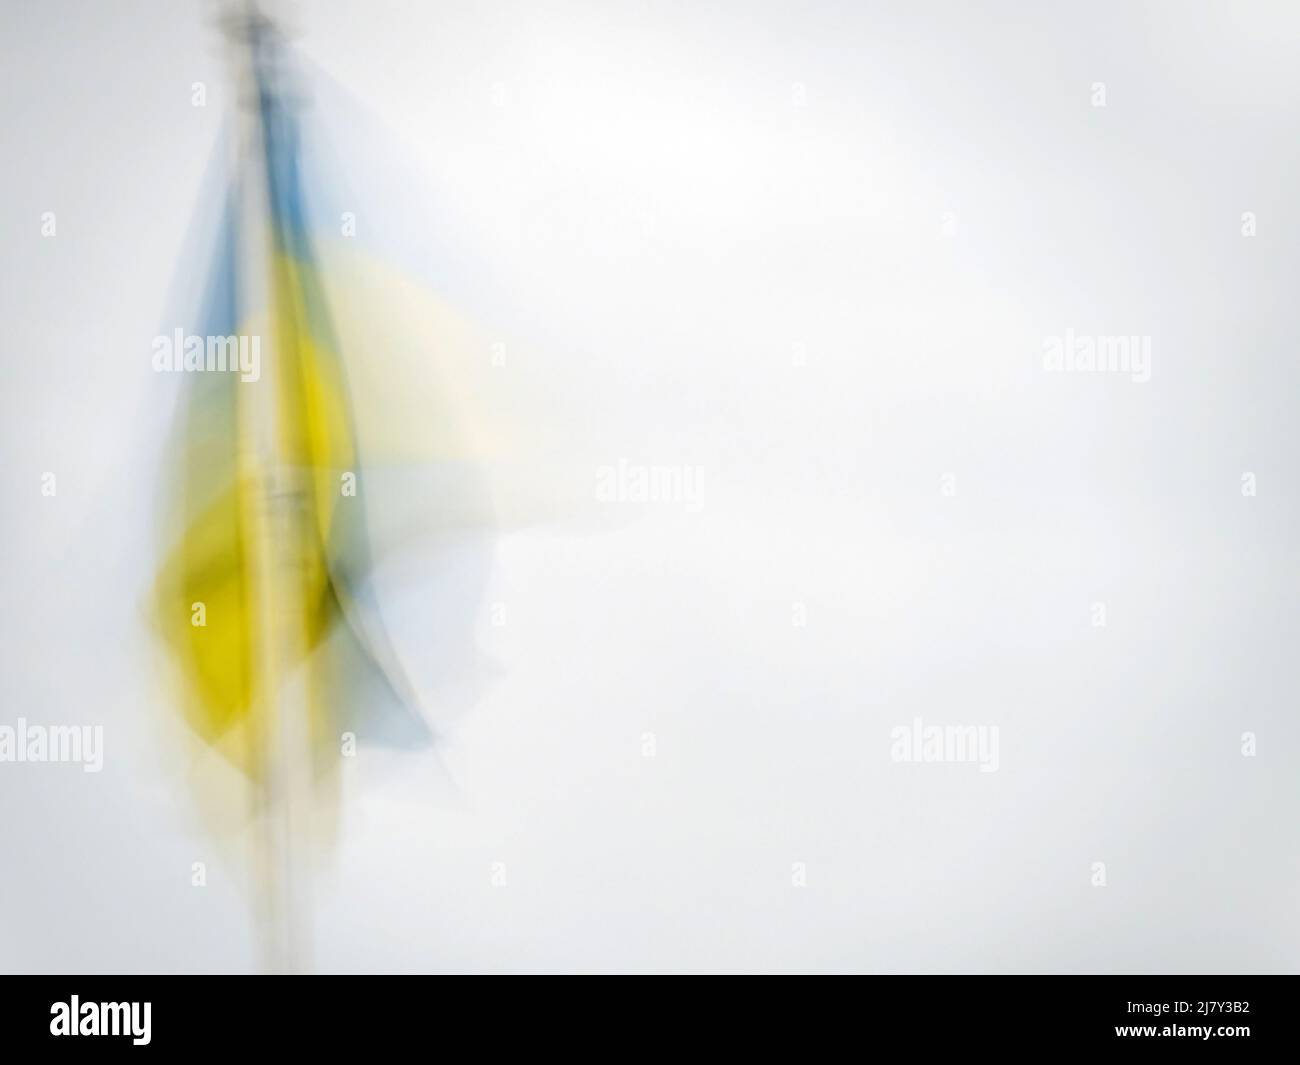 Ukraine national flag hanging in light breeze. Impressionist effect with copyspace. Stock Photo